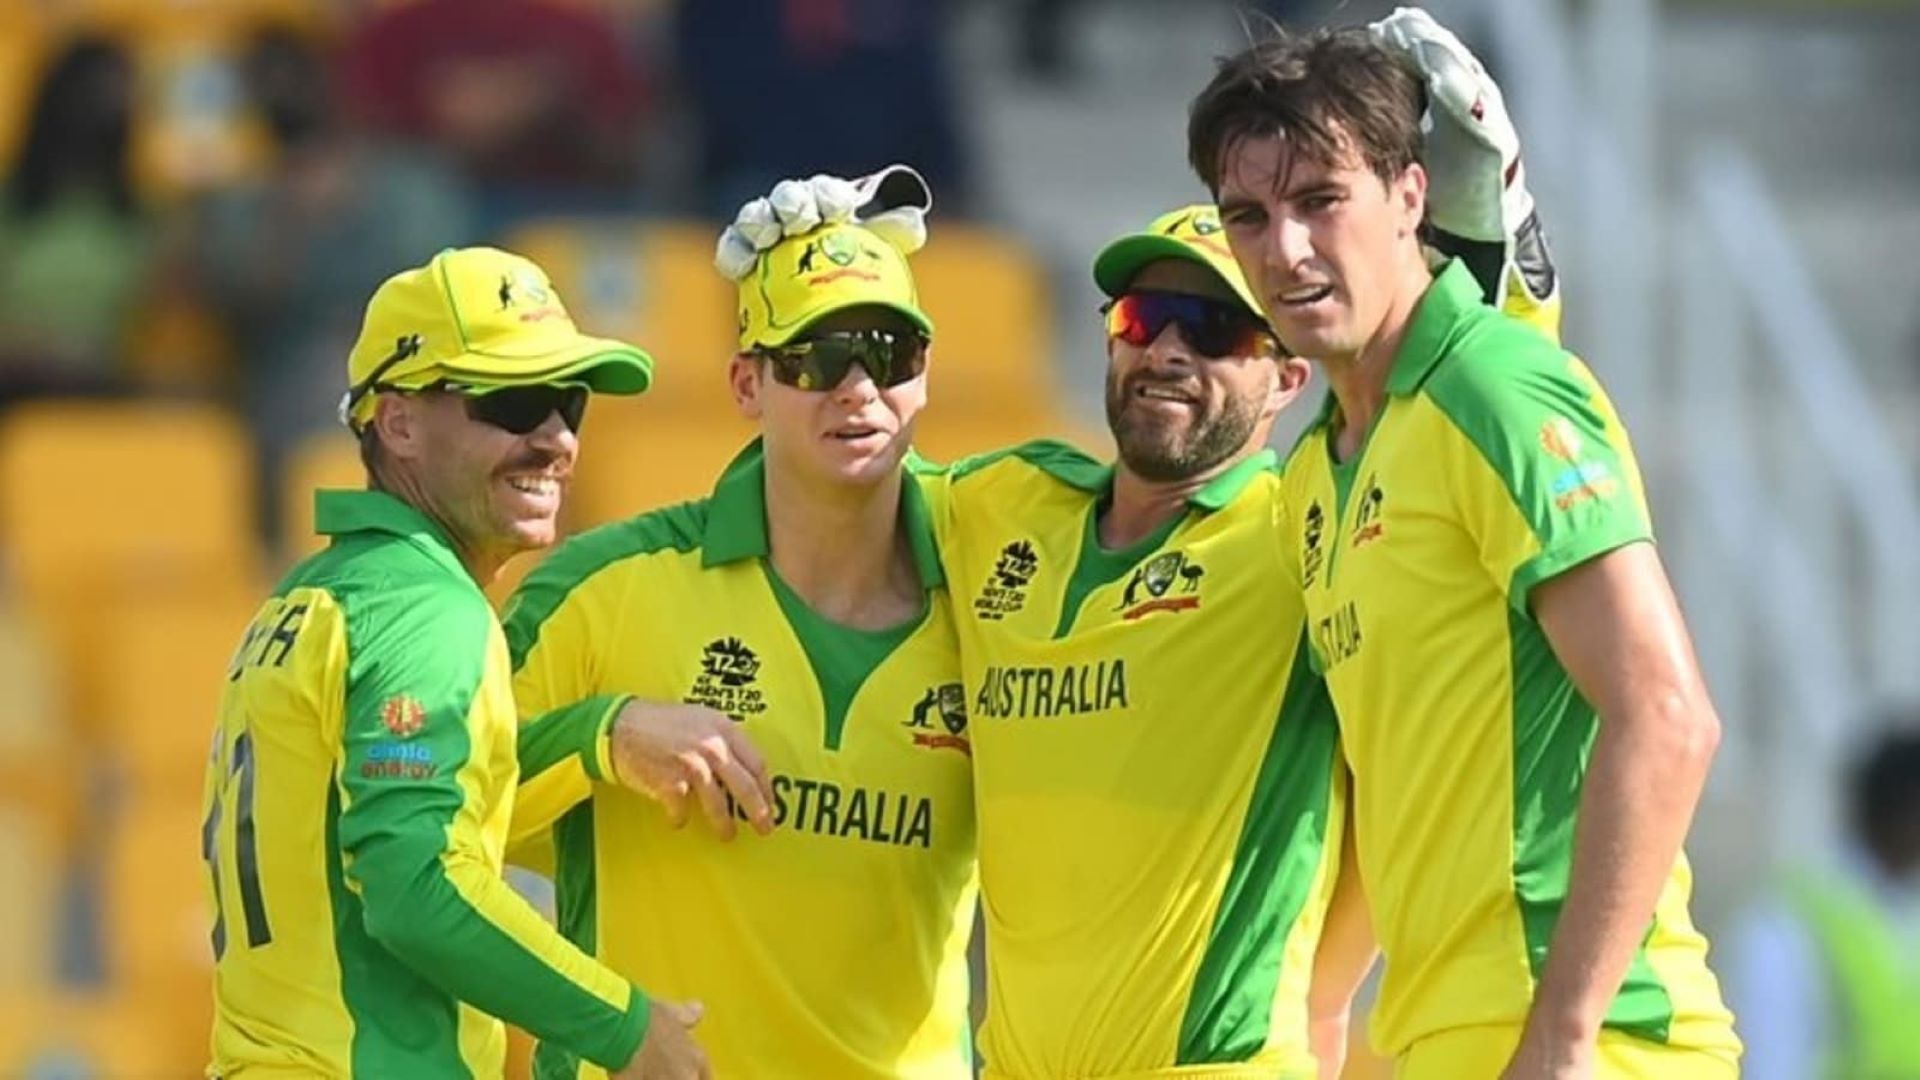 The upcoming World Cup might be the final hurrah for several core Aussie players.